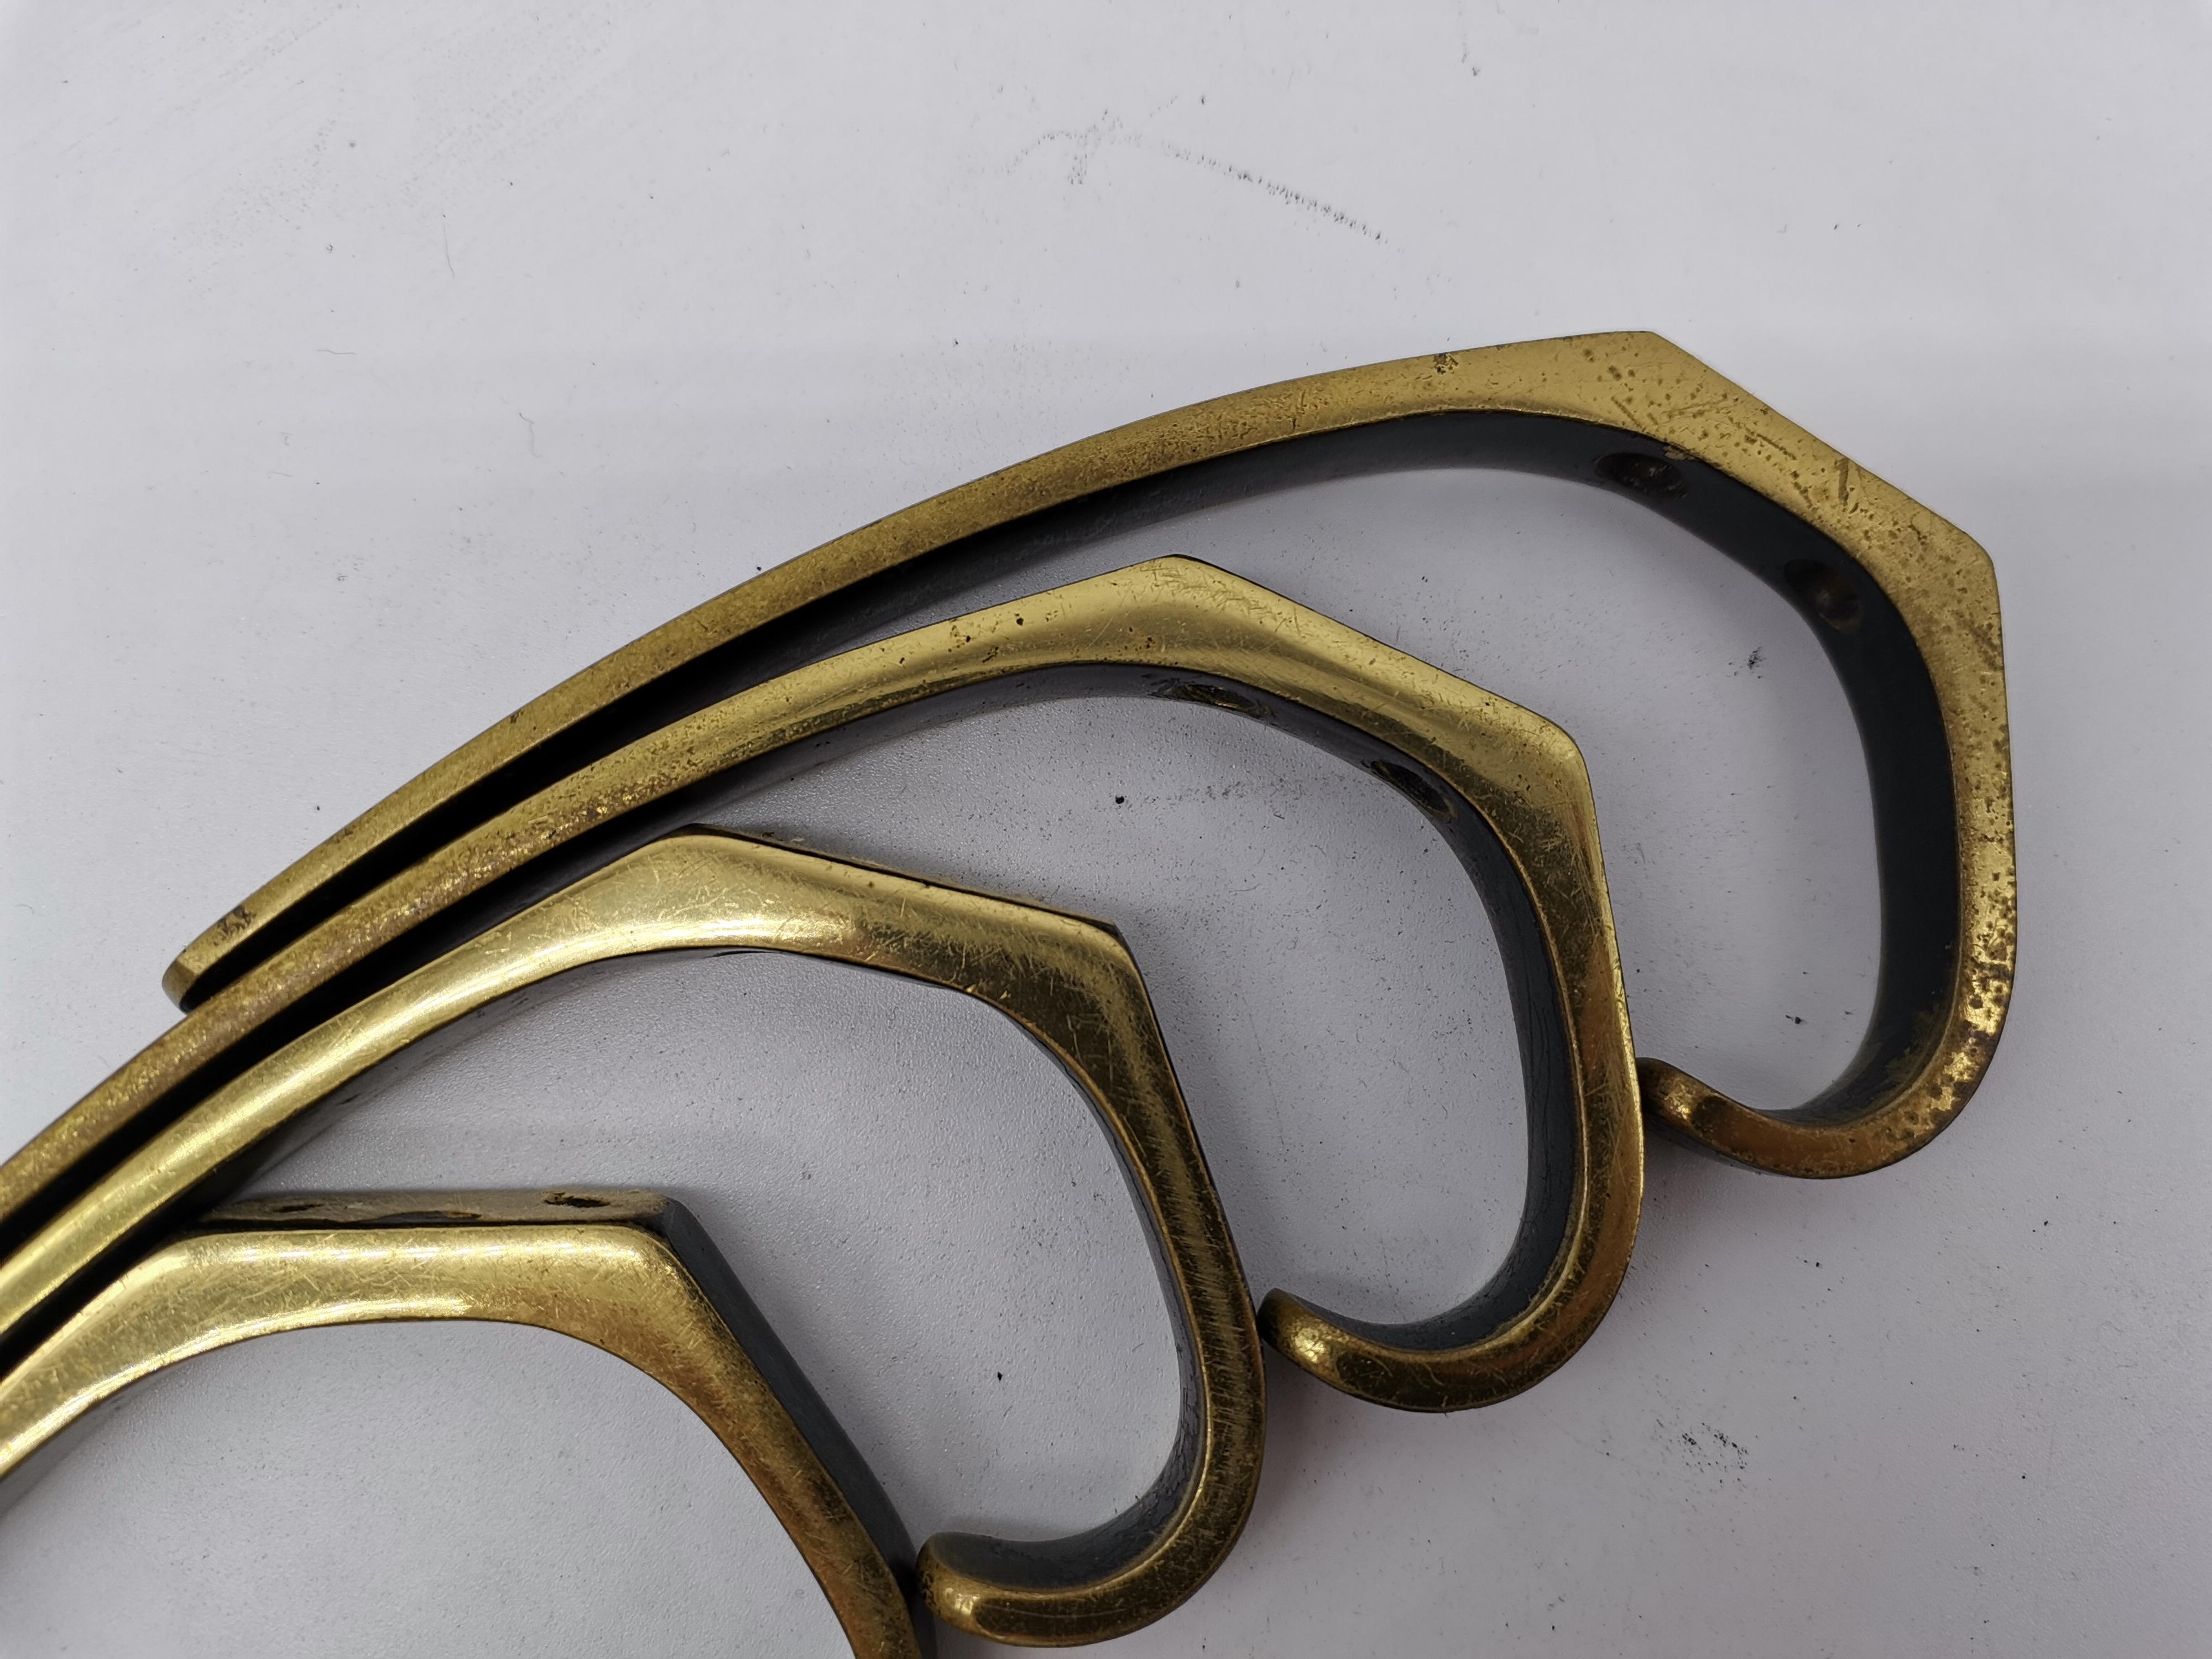 4 Pcs. Wall Hooks, Brass Blackened, Hertha Baller In Good Condition For Sale In Vienna, AT